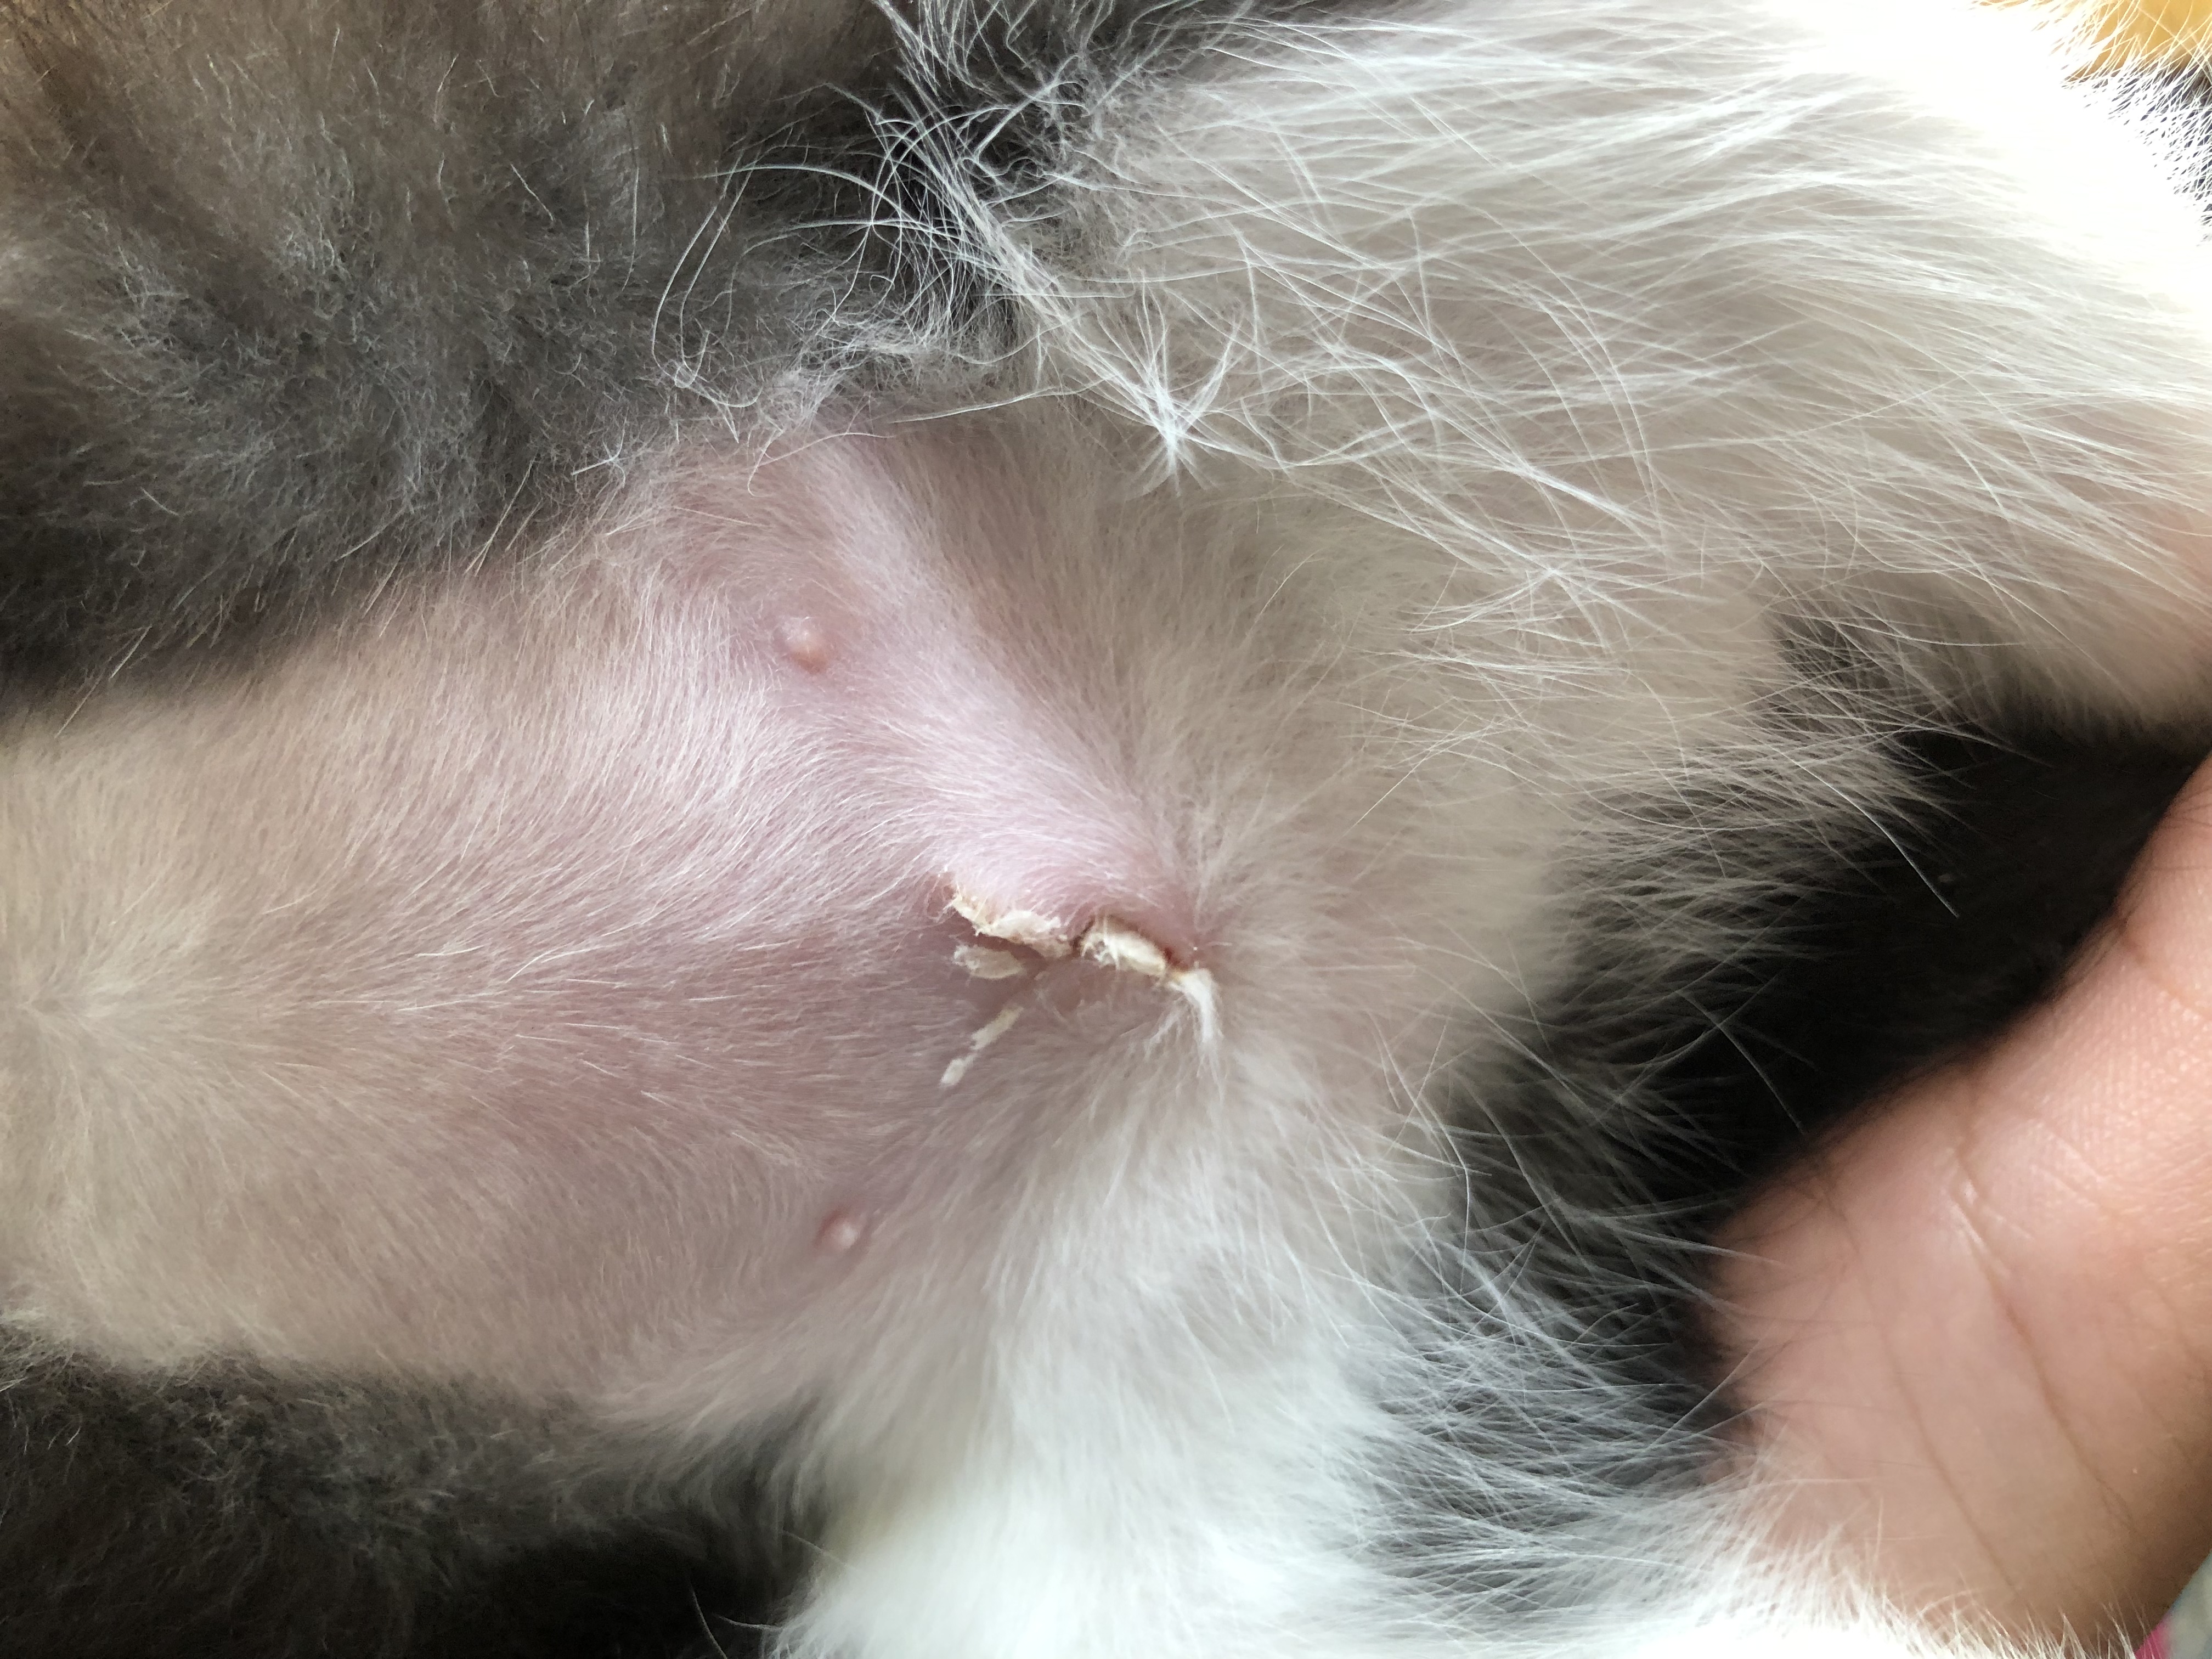 Is My Kitten’s Spay Incision Healing Properly? TheCatSite